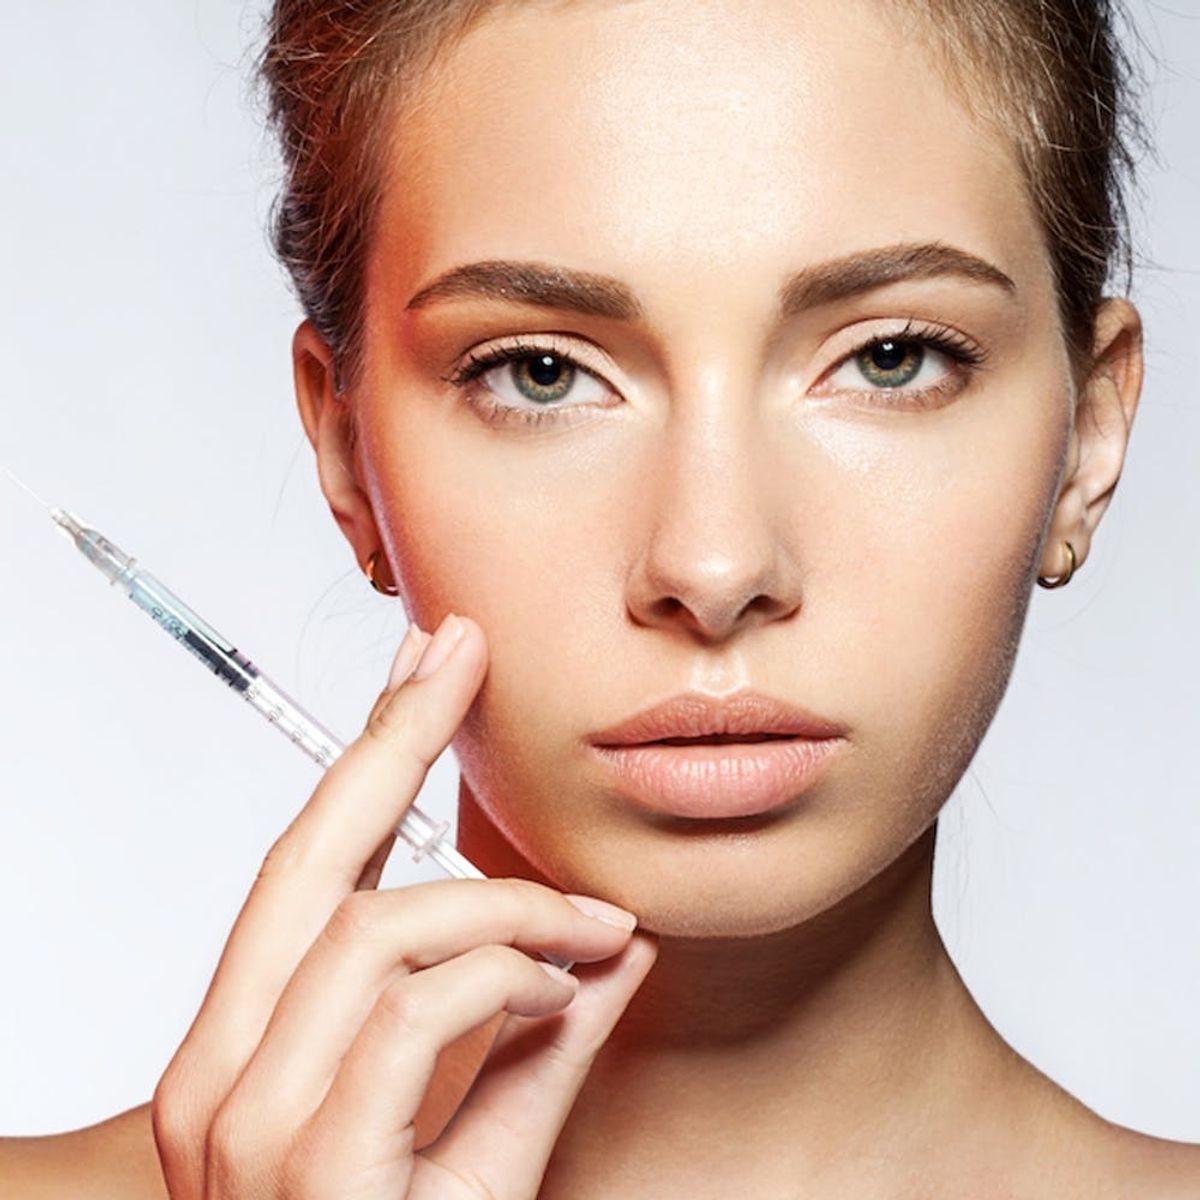 What You Need to Know About Botox, Dysport, and Xeomin